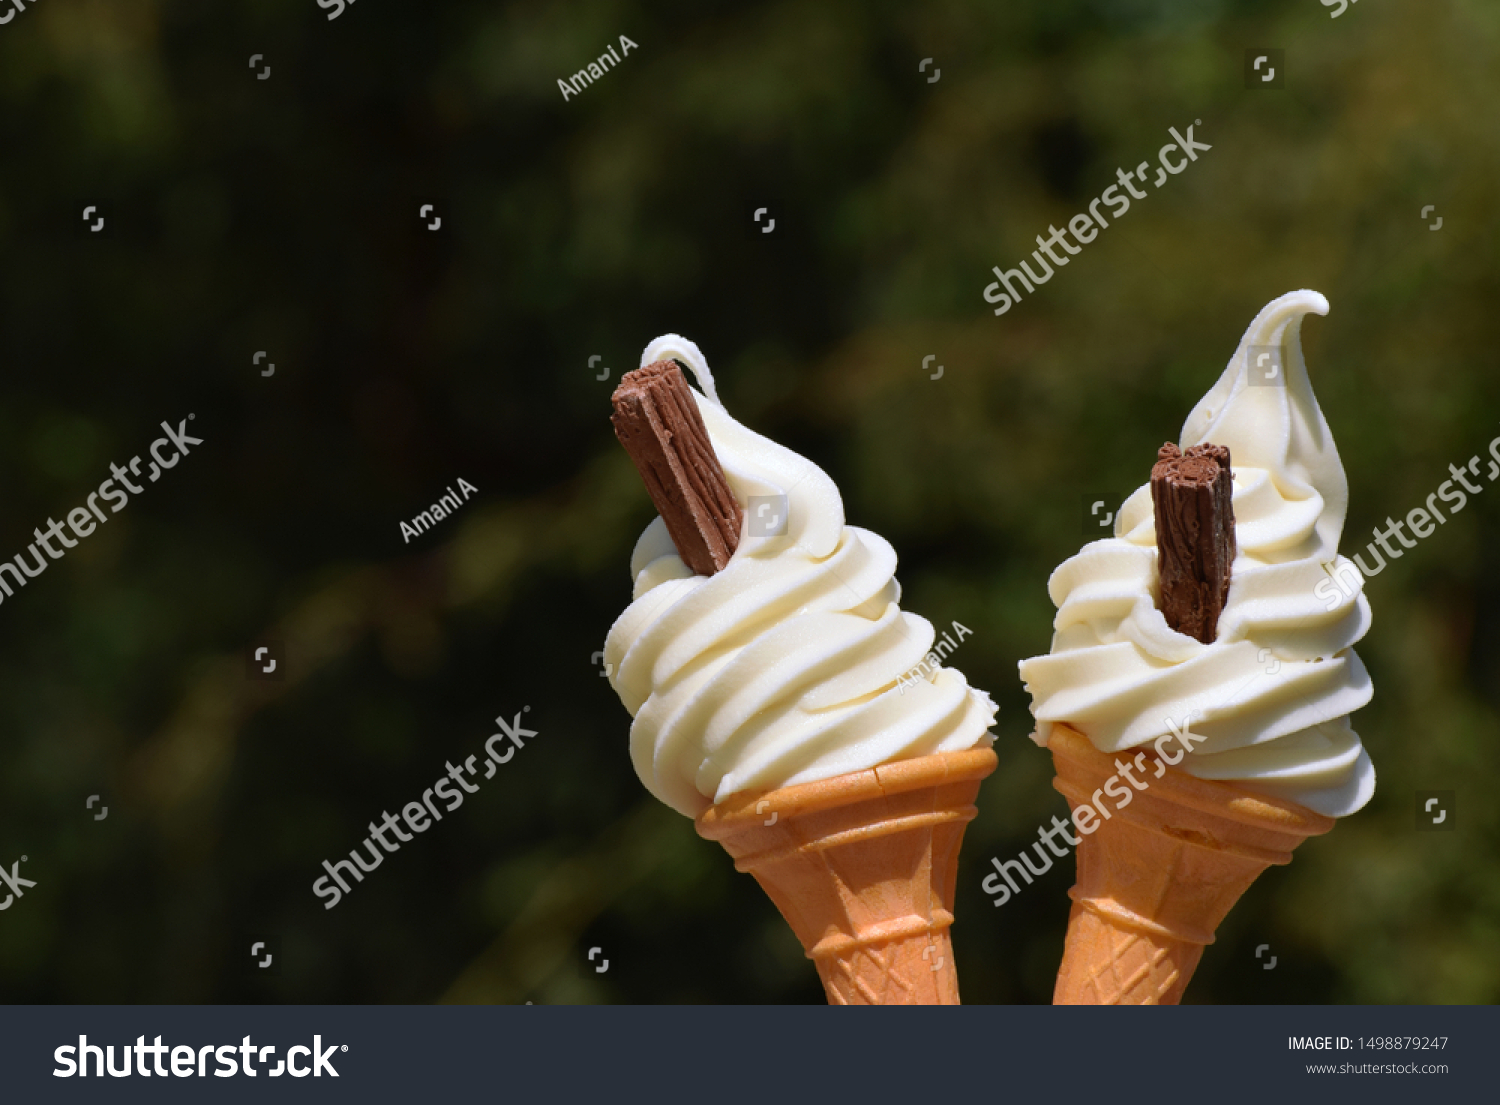 Two Wafer Cones Containing Whipped soft vanilla ice cream with chocolate flakes. Commonly know as flake 99s or Mr Whippy #1498879247